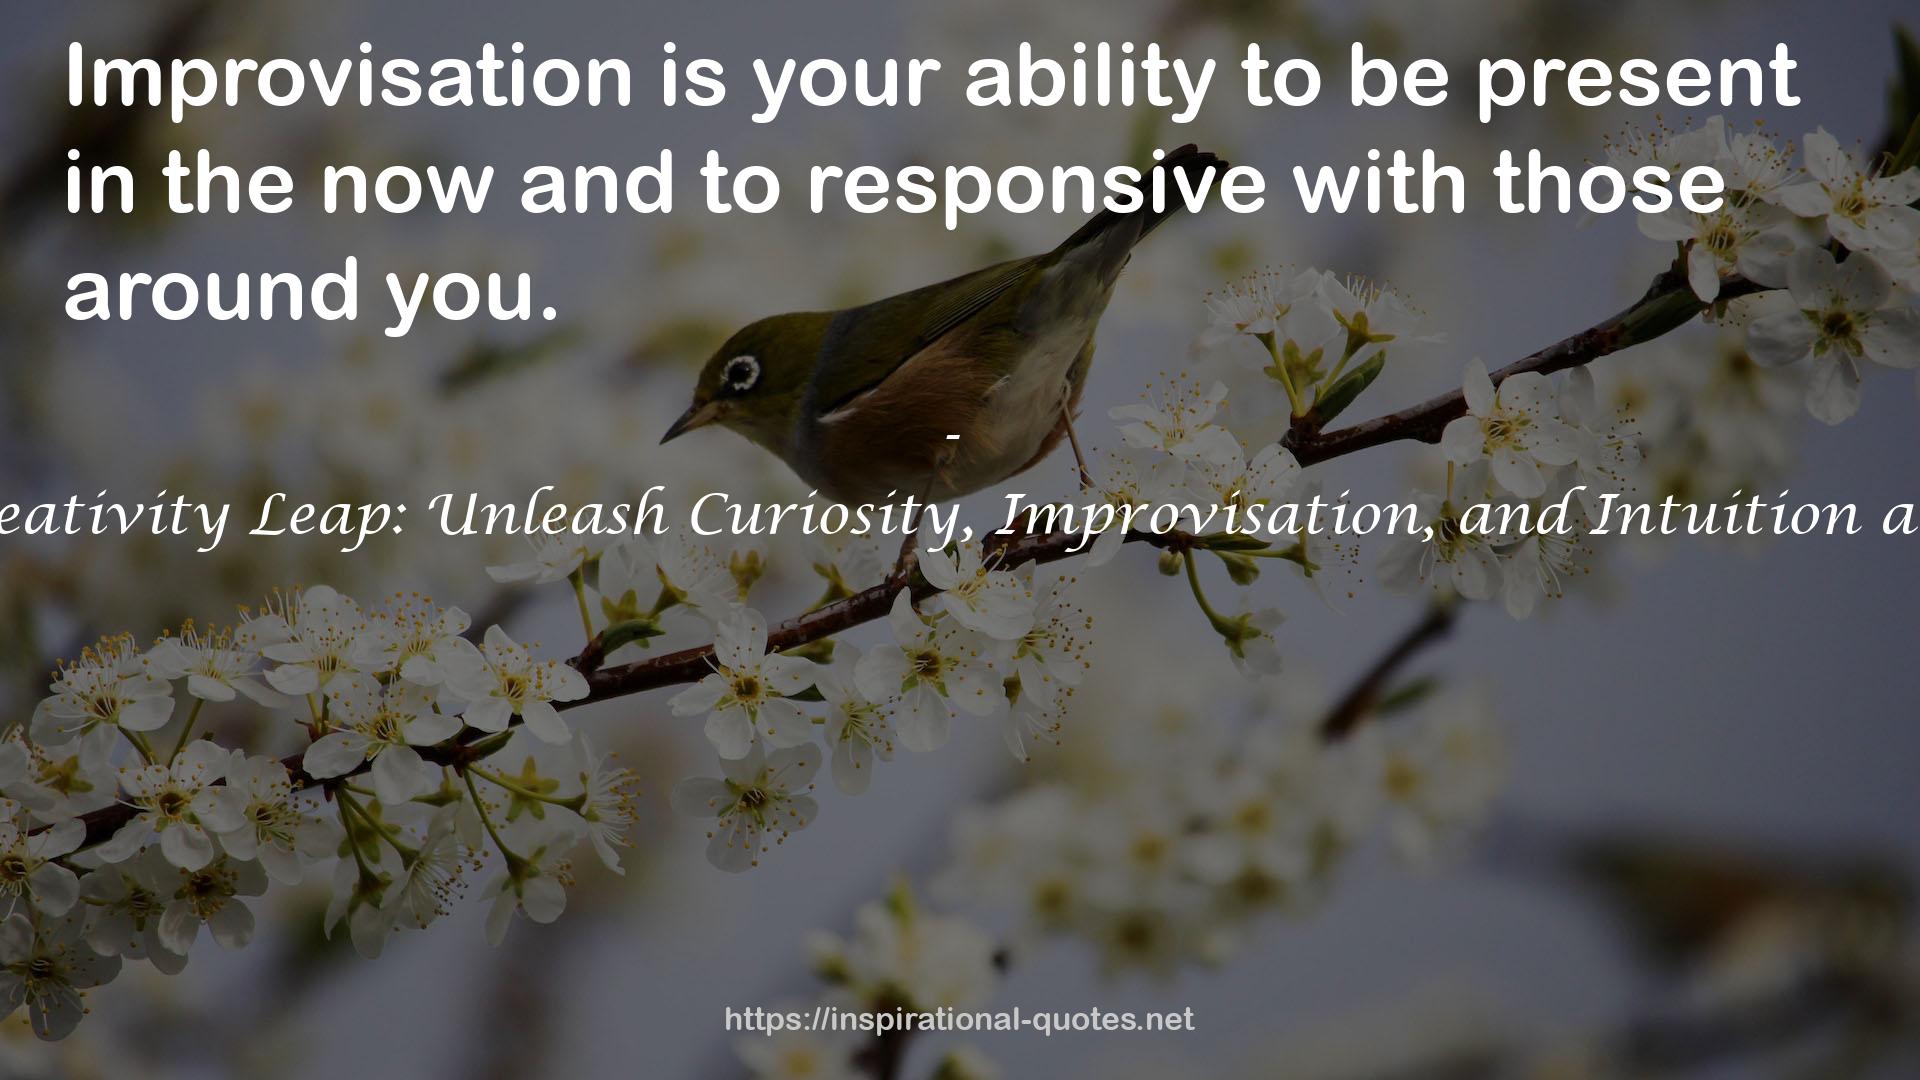 The Creativity Leap: Unleash Curiosity, Improvisation, and Intuition at Work QUOTES